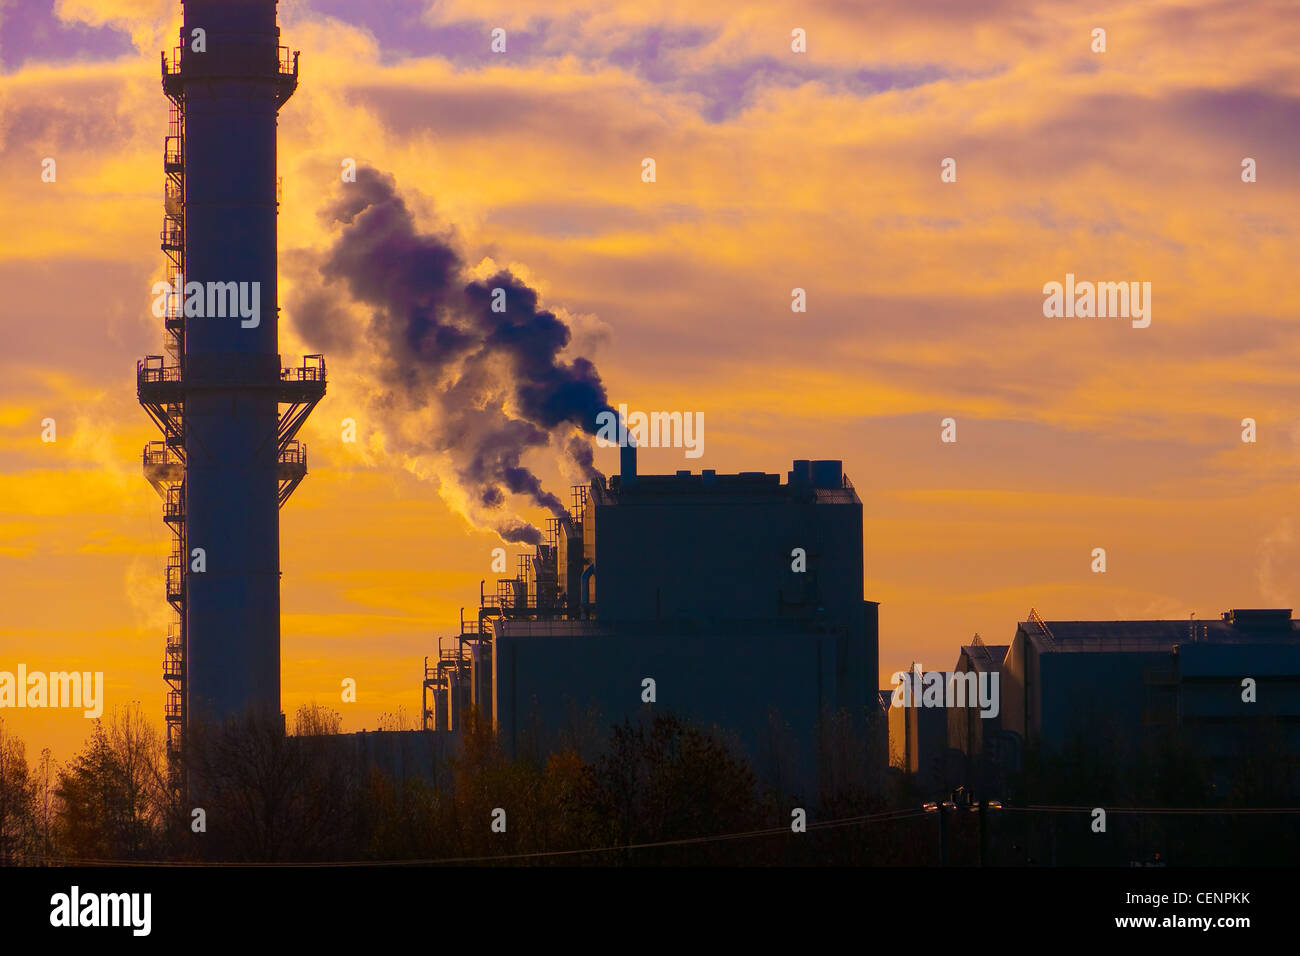 Dramatic sunset over gas power station steam rising into atmosphere Stock Photo